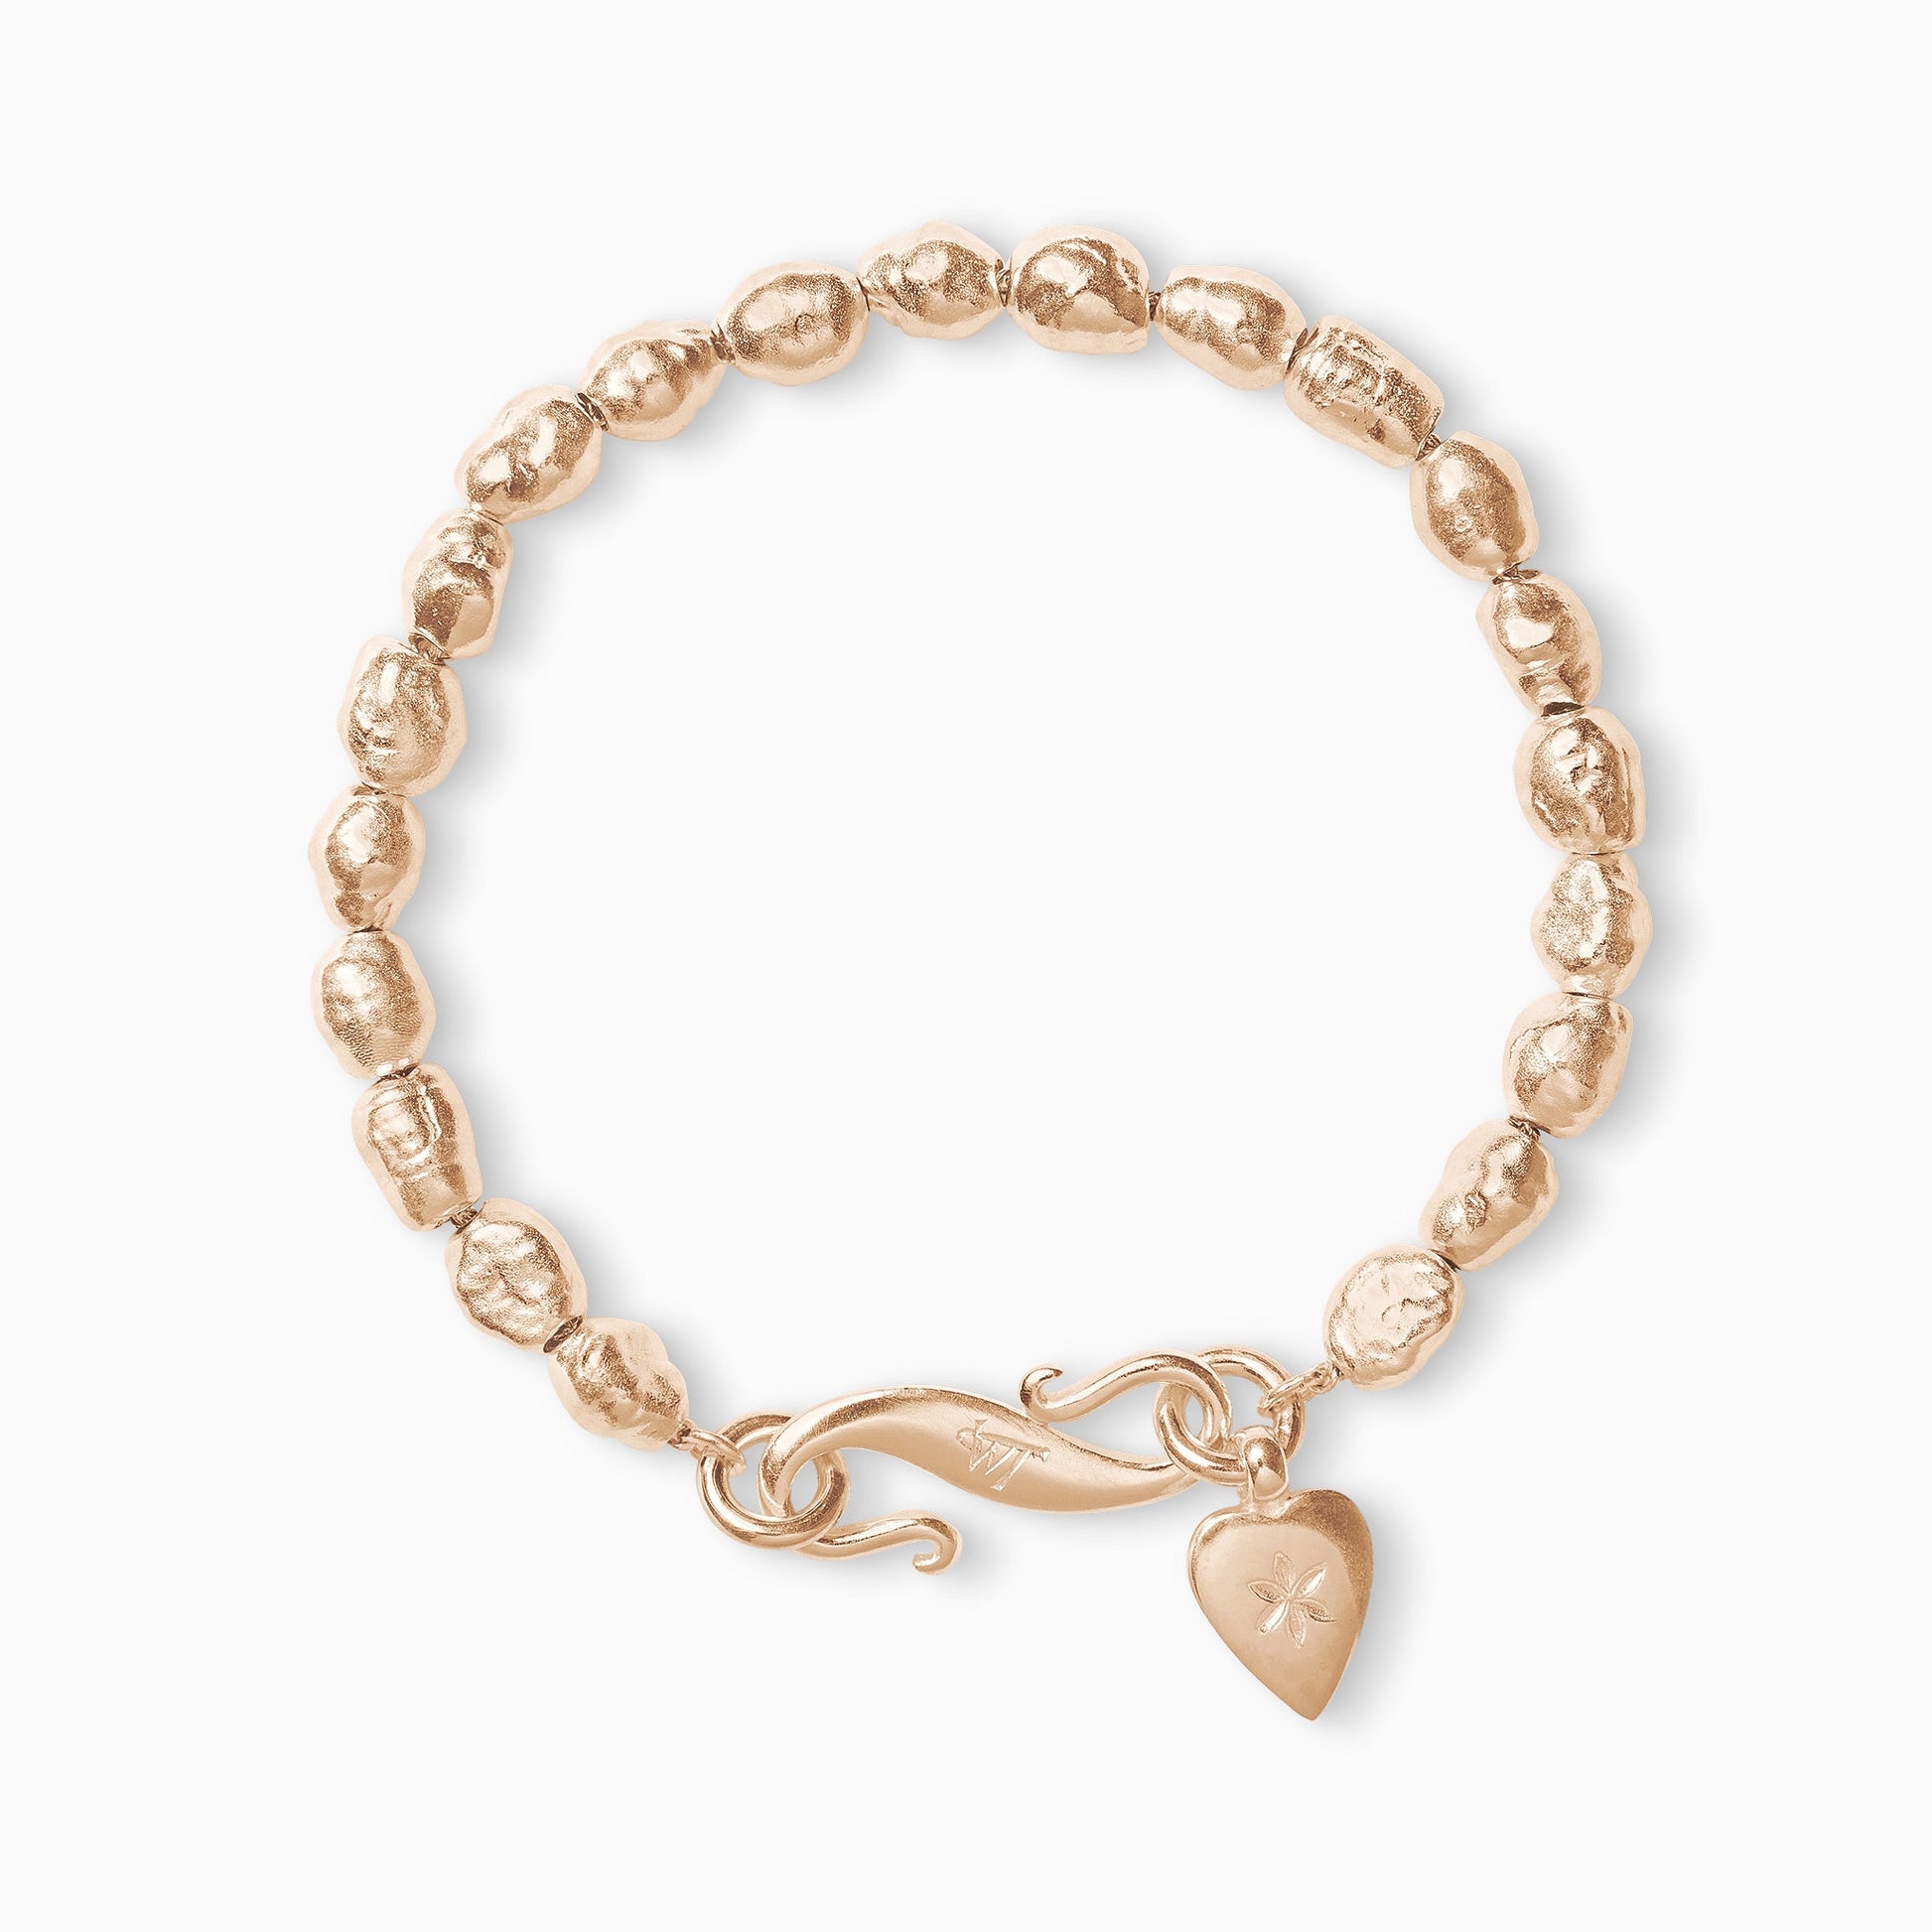 An 18ct Fairtrade rose gold bracelet of handmade irregular pearl shaped textured beads with a smooth heart shaped charm engraved with a 6 petal flower and our signature ’S’ clasp. Bracelet length 190mm. Beads varying approximately 8mm x 6mm.